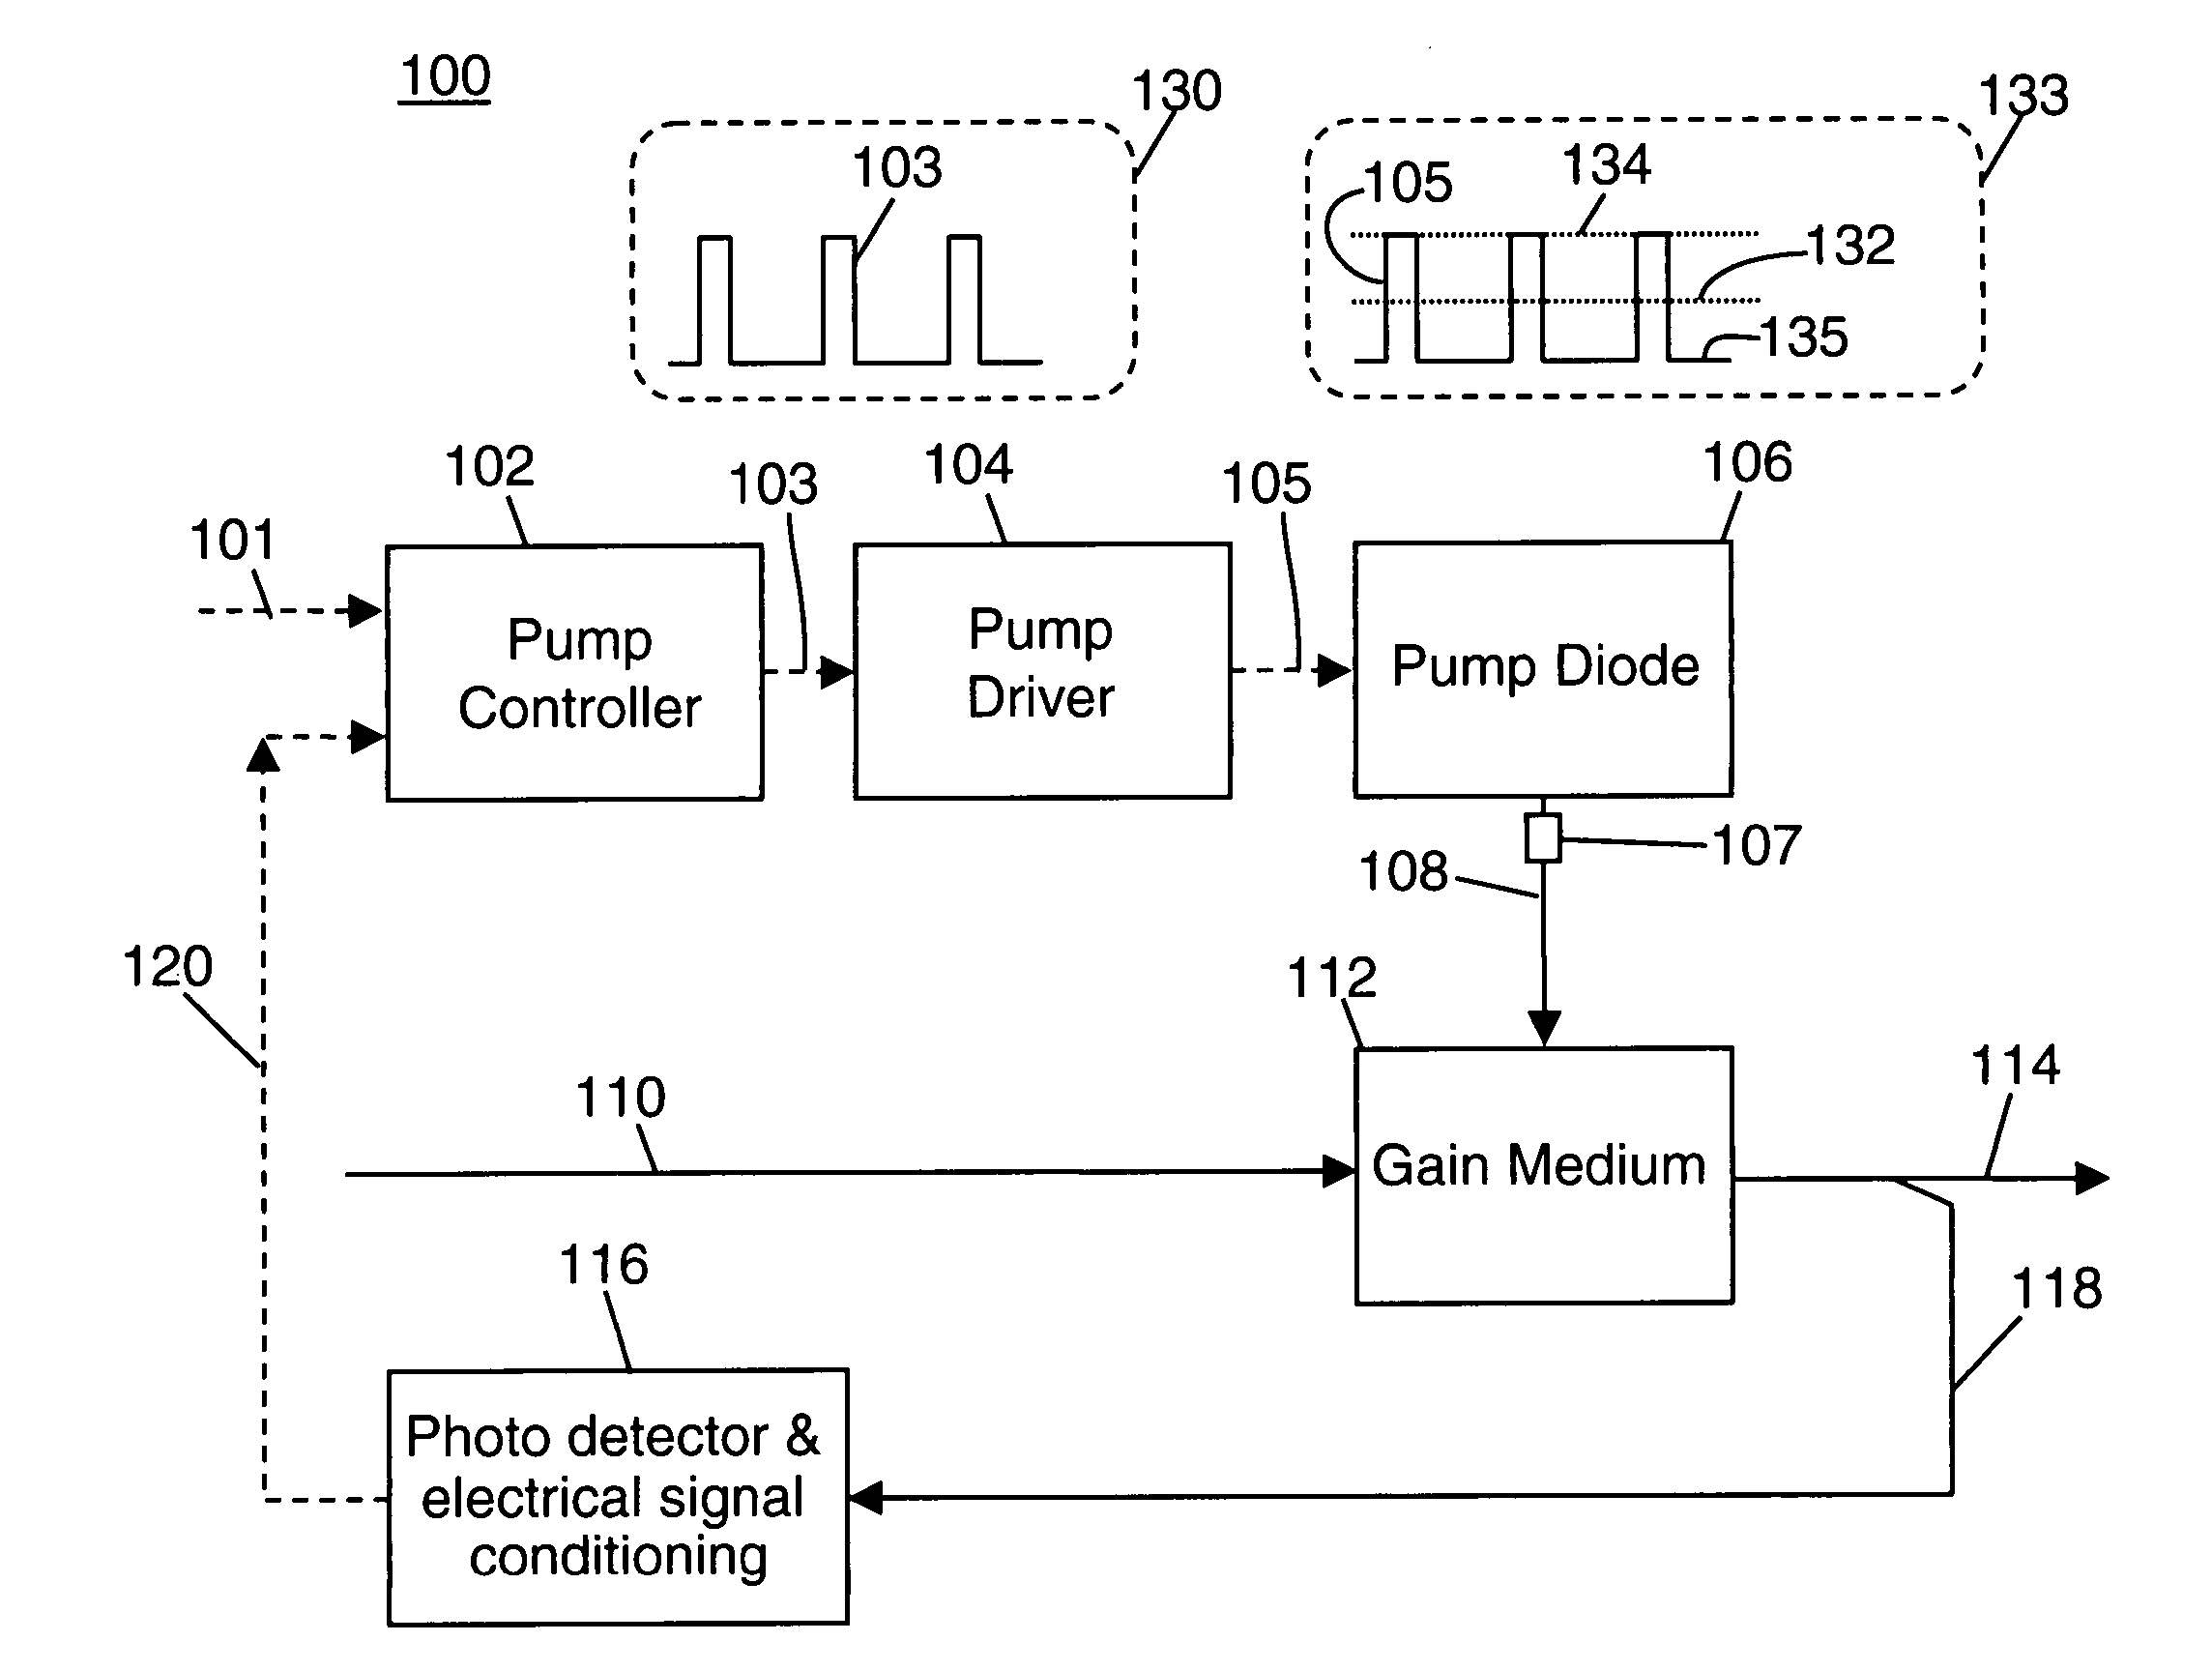 System and method for dynamic range extension and stable low power operation of optical amplifiers using pump laser pulse modulation